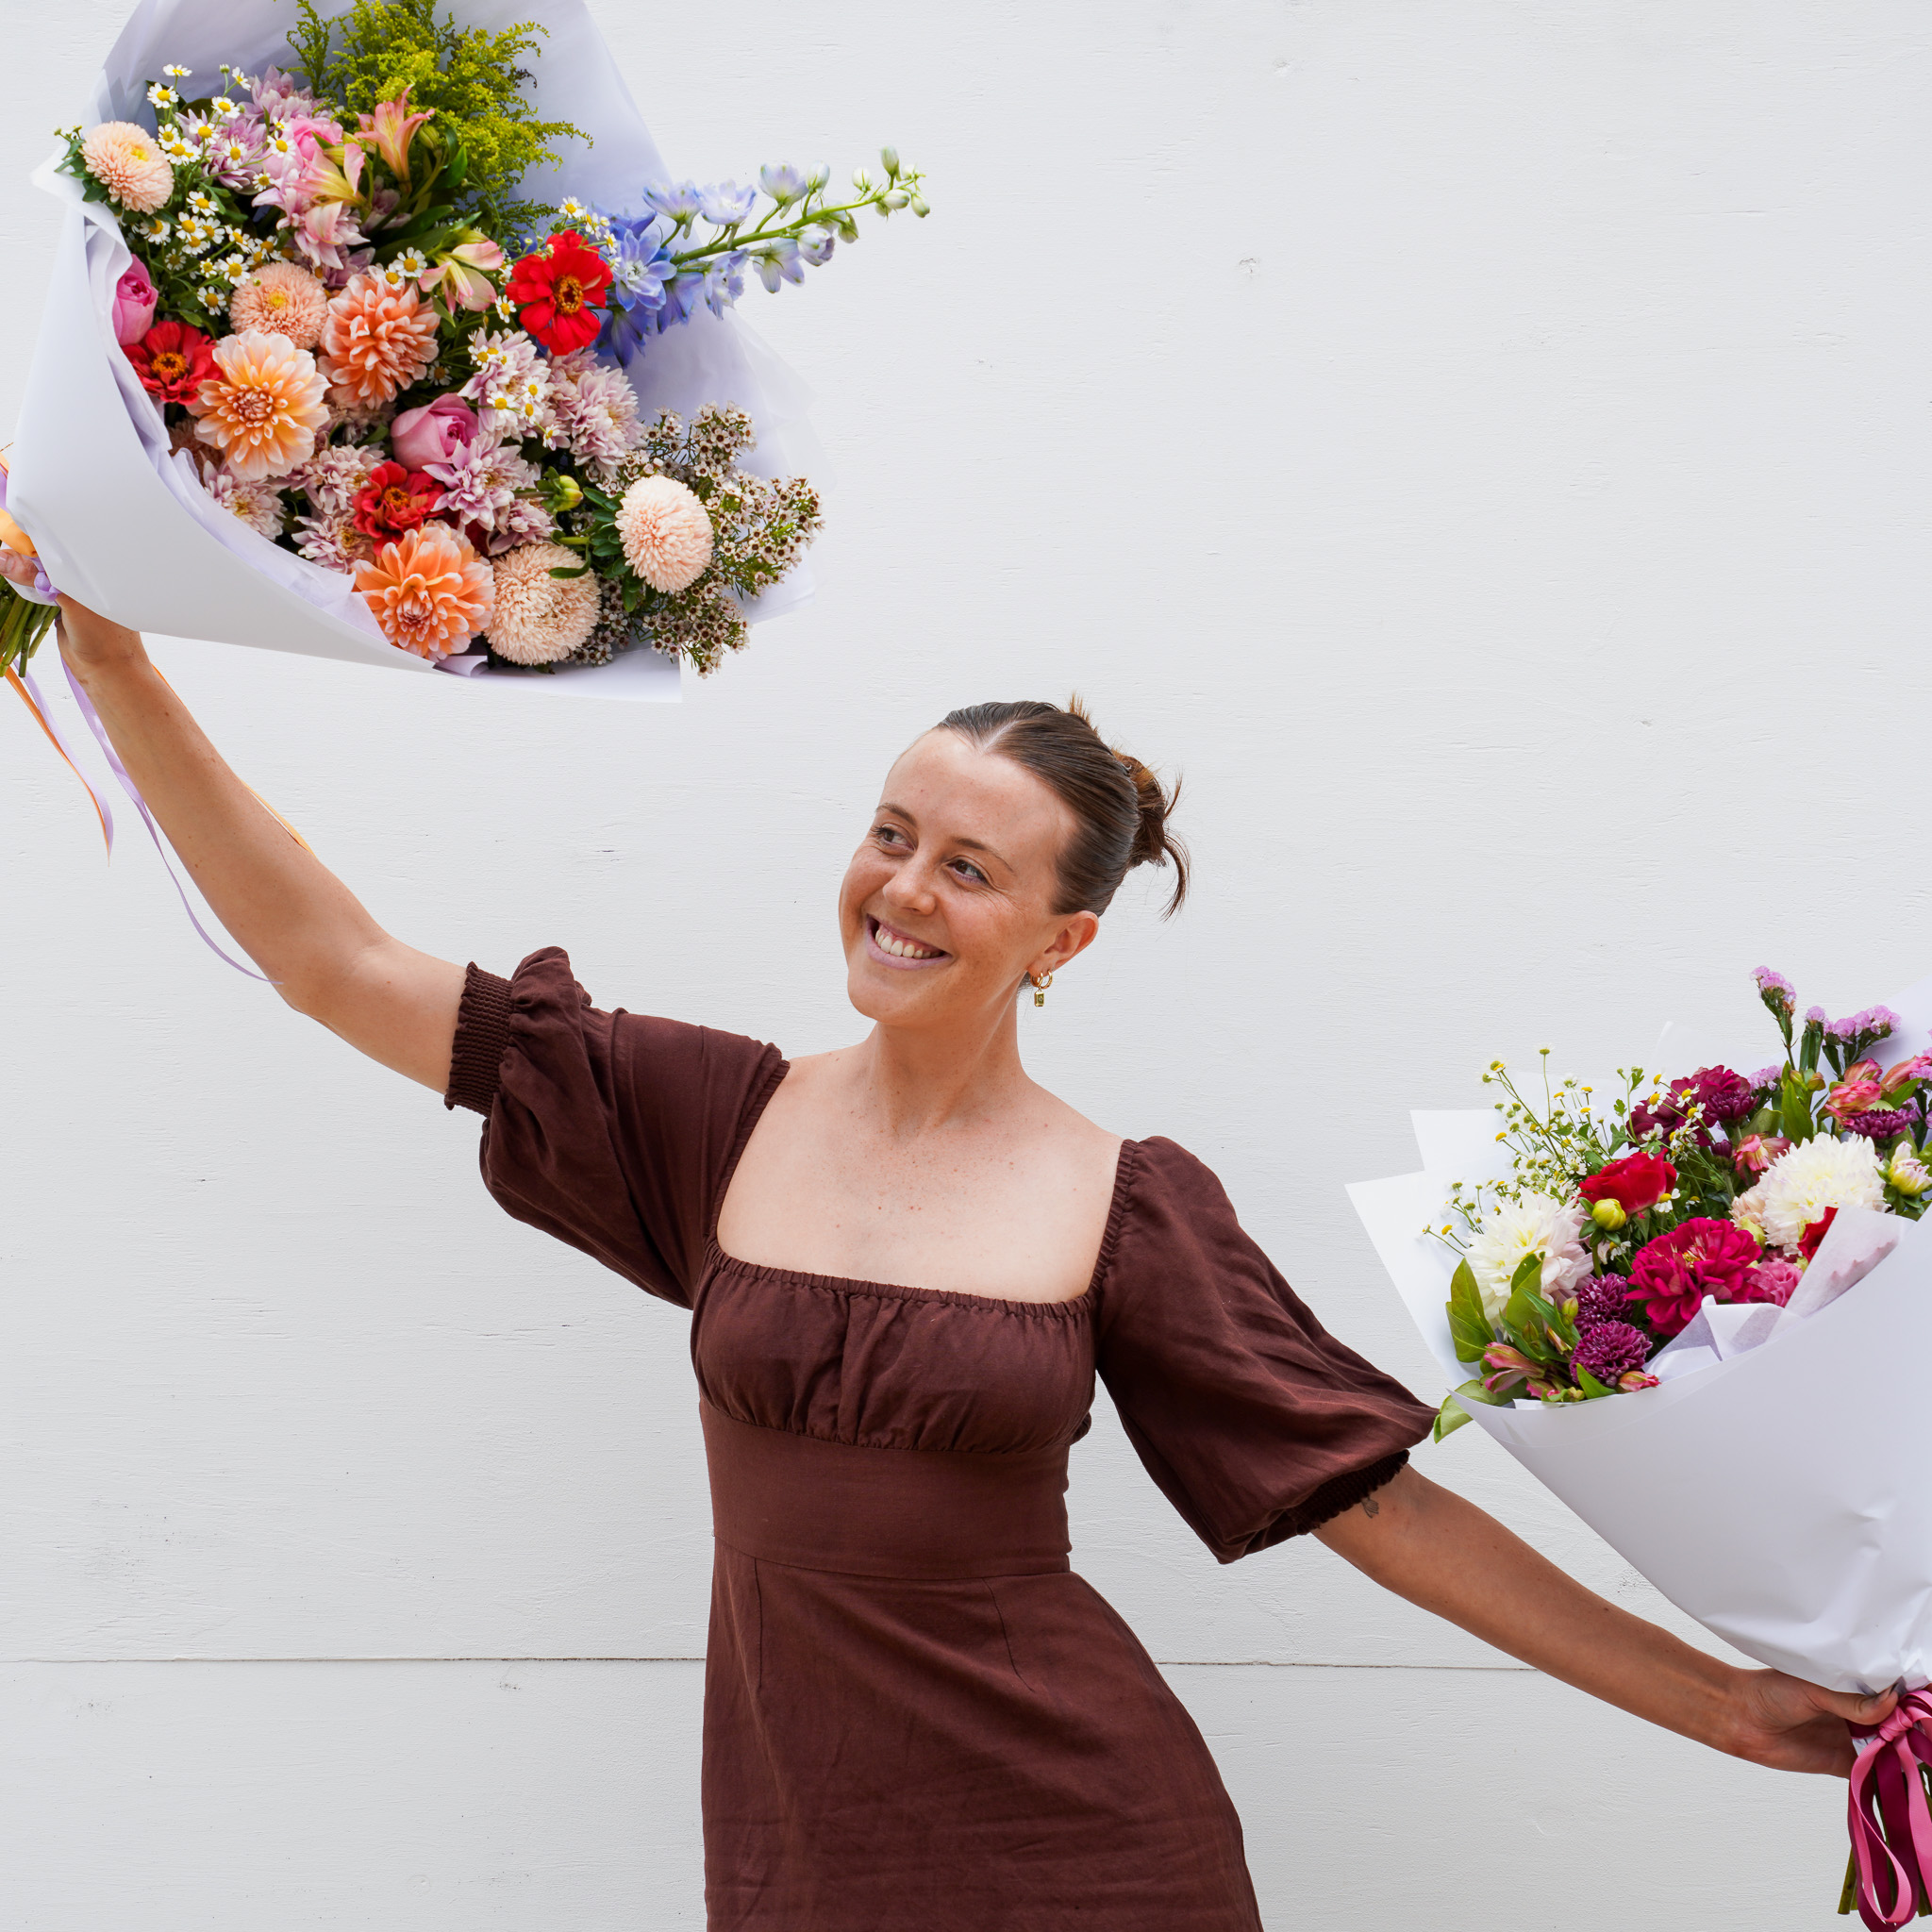 A happy woman dancing with bunches of flowers in Brisbane